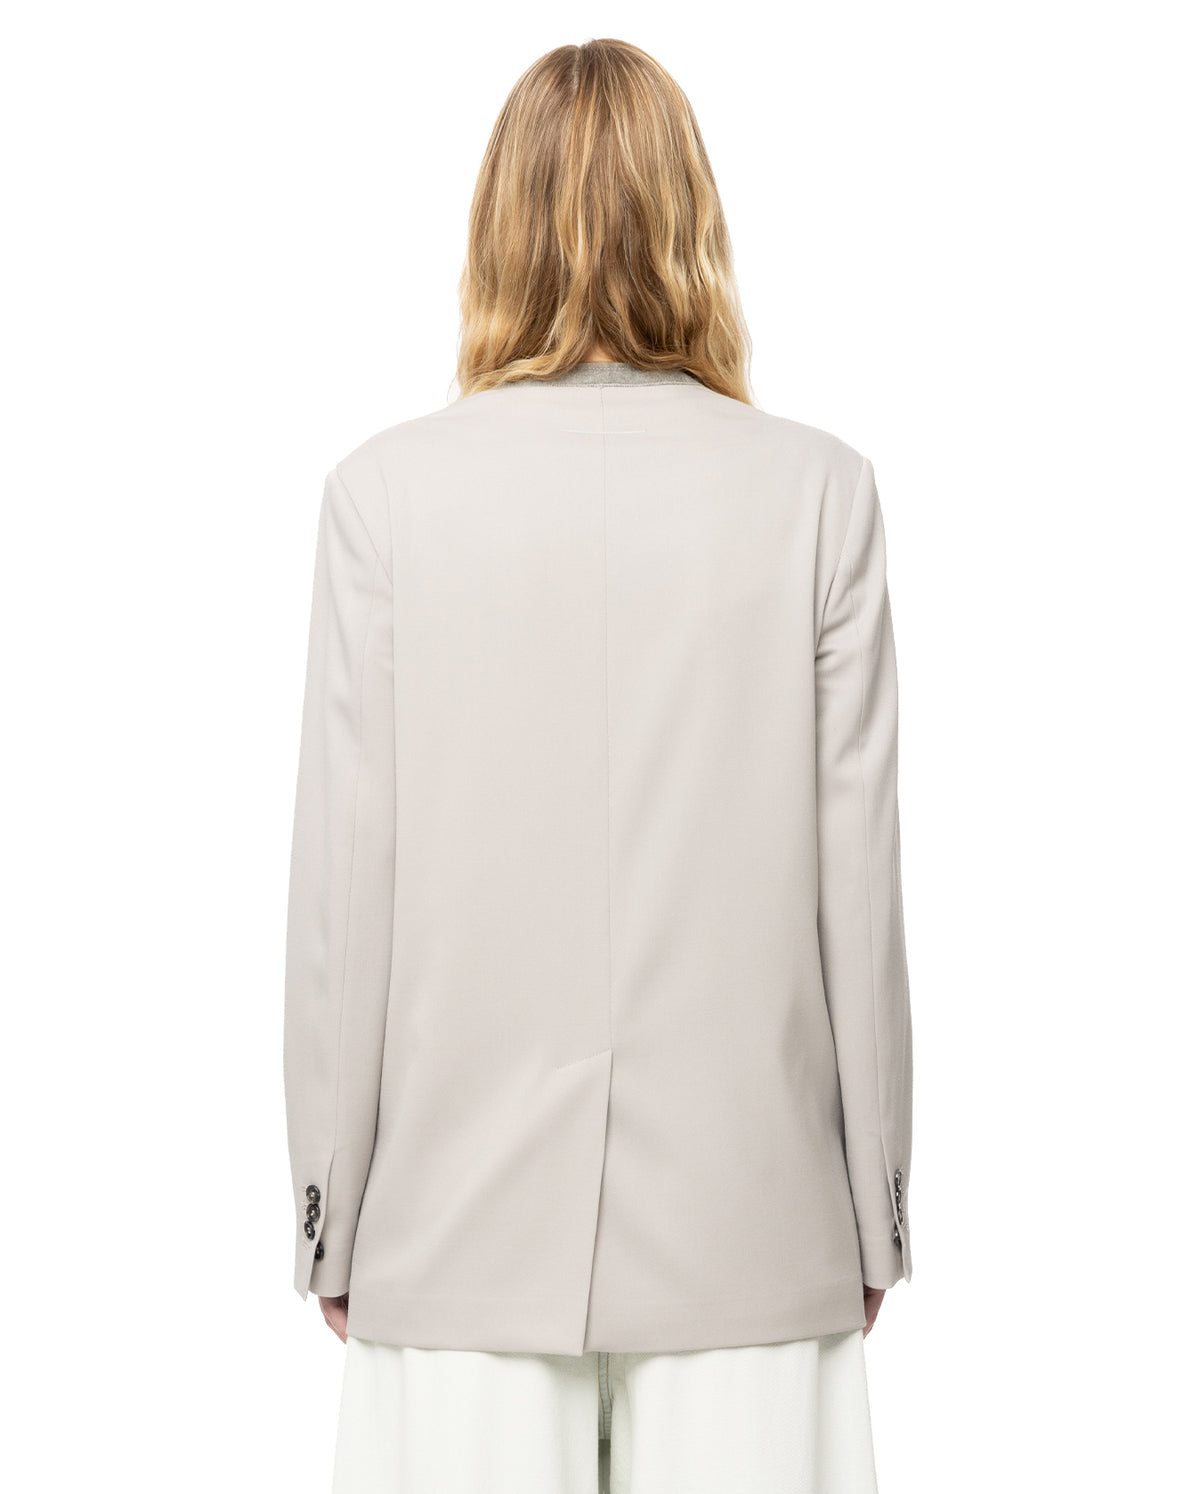 Single Breasted Y-Neck Blazer - Taupe